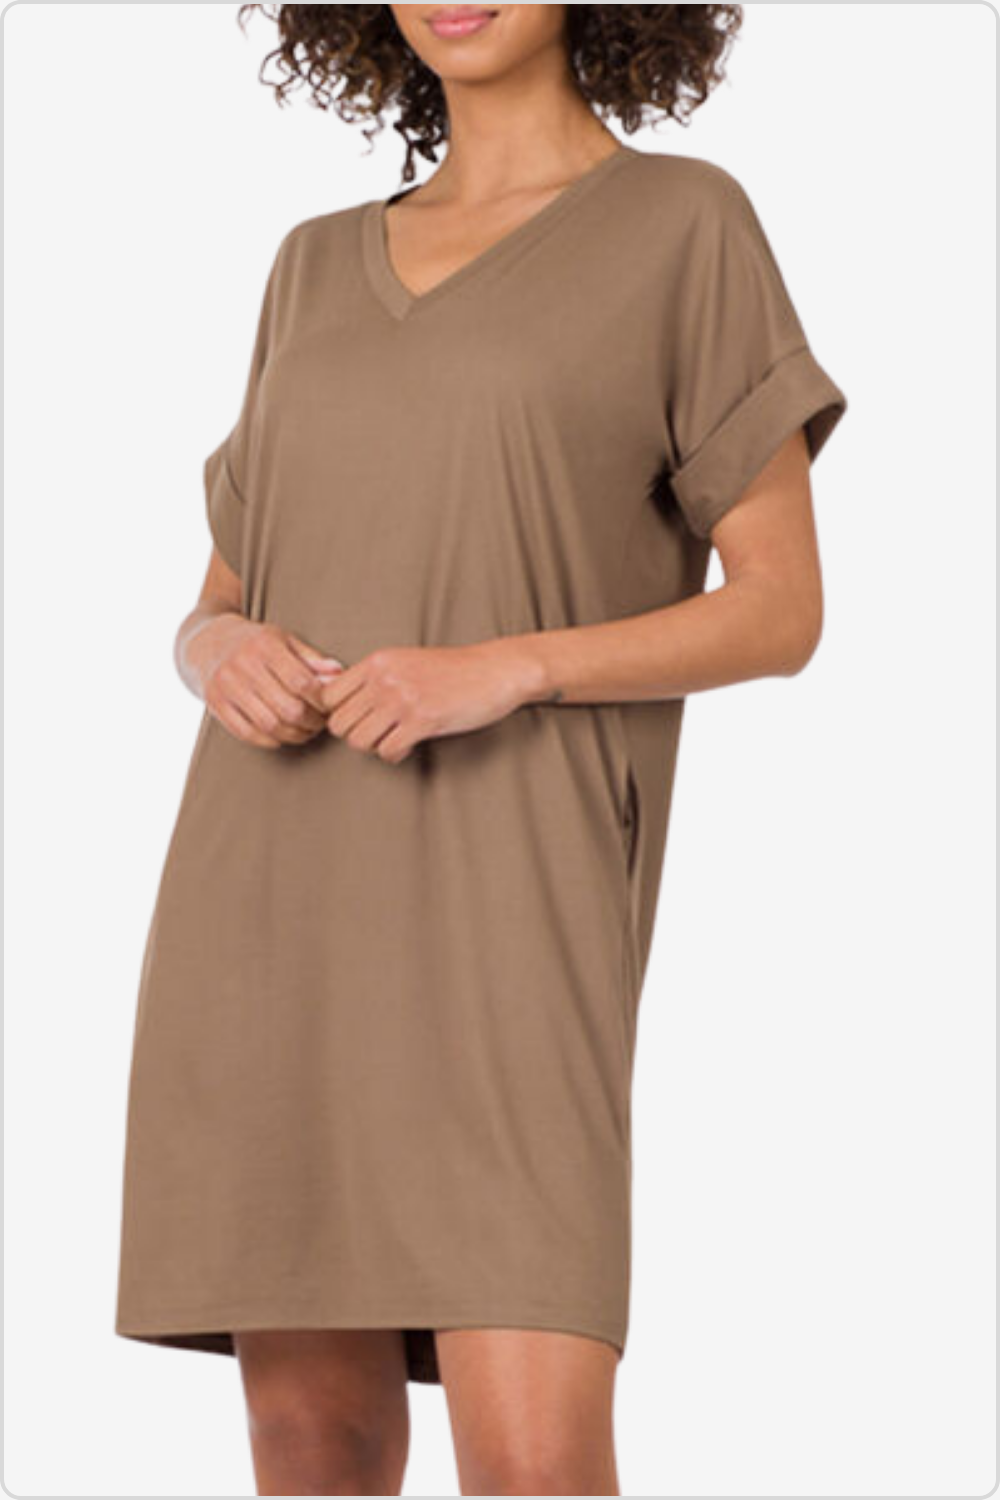 Fashion-forward model in Rolled Sleeve V-Neck Dress, front view.